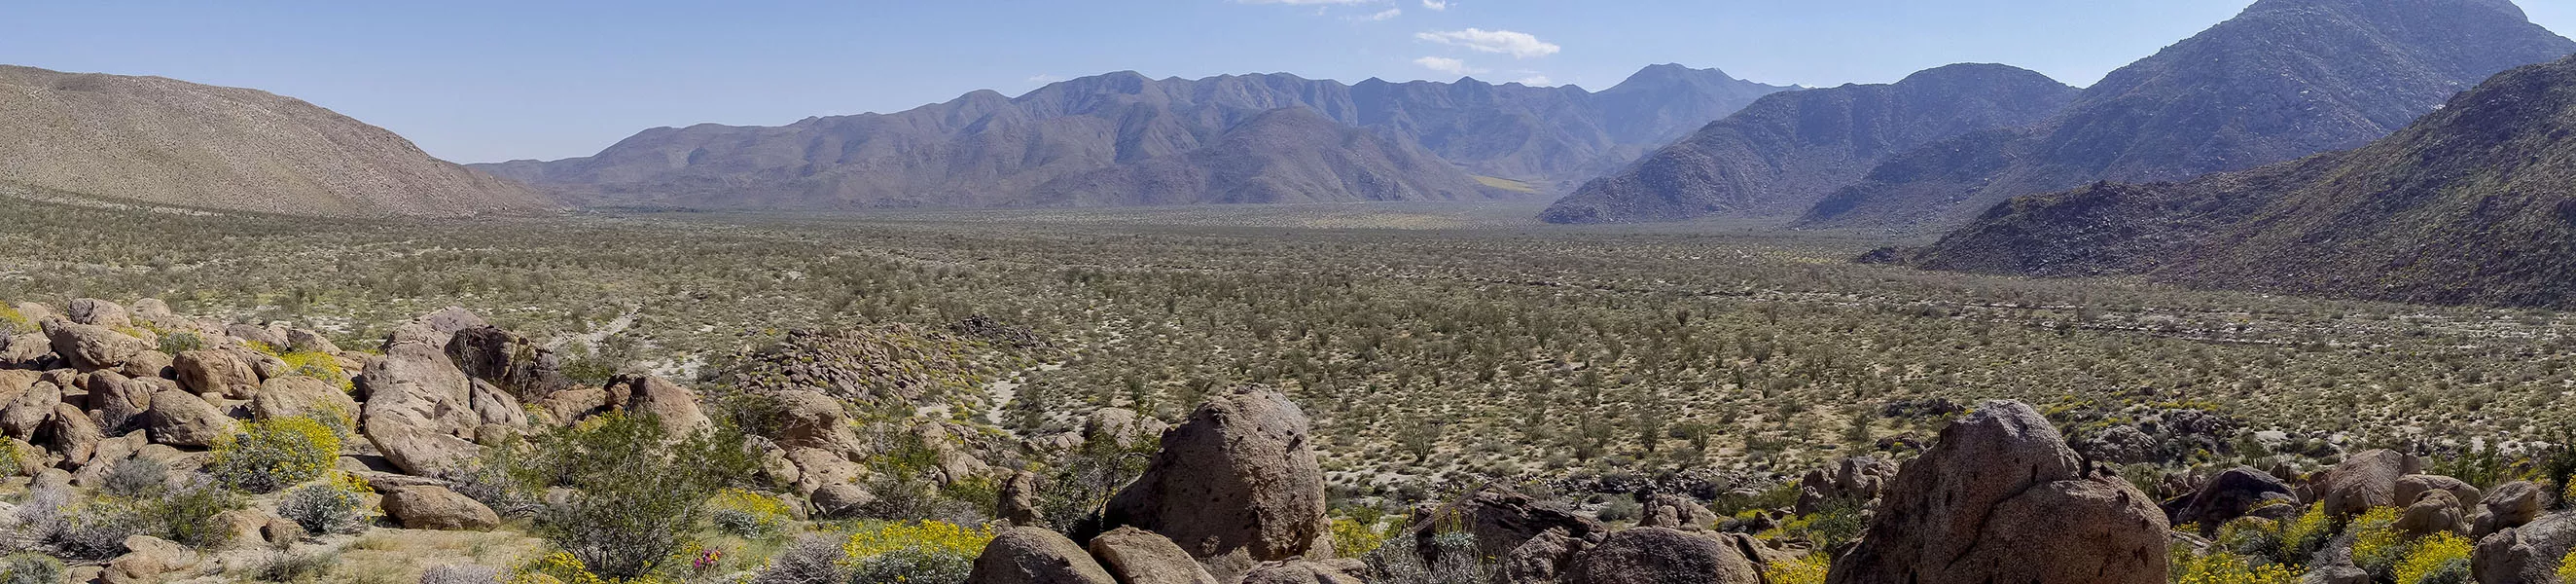 Panorama of Coyote Canyon in Anza-Borrego Desert State Park.